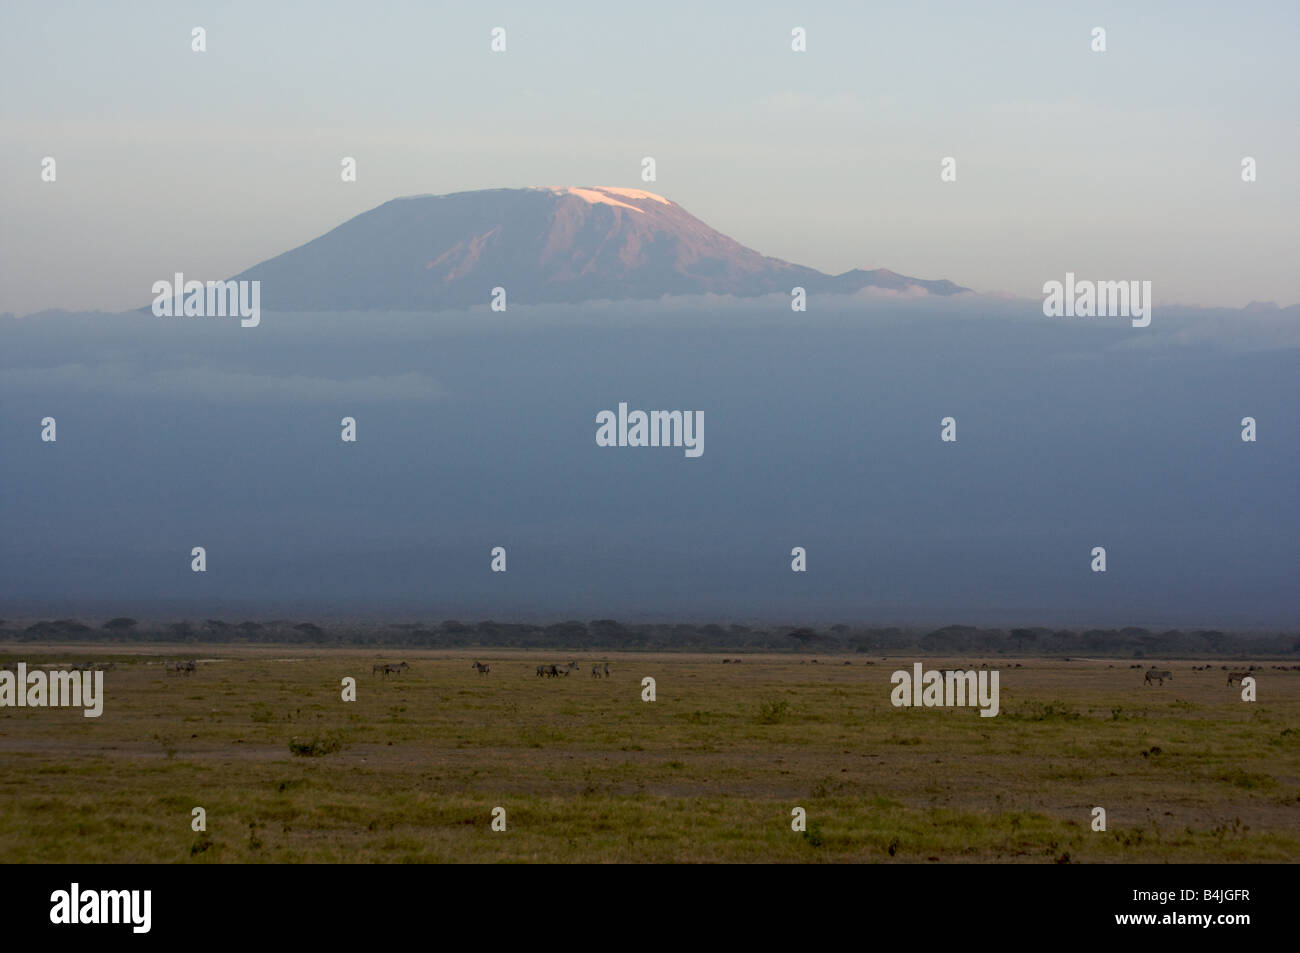 A view of Mount Kilimanjaro from Amboseli National Park in Kenya Stock Photo